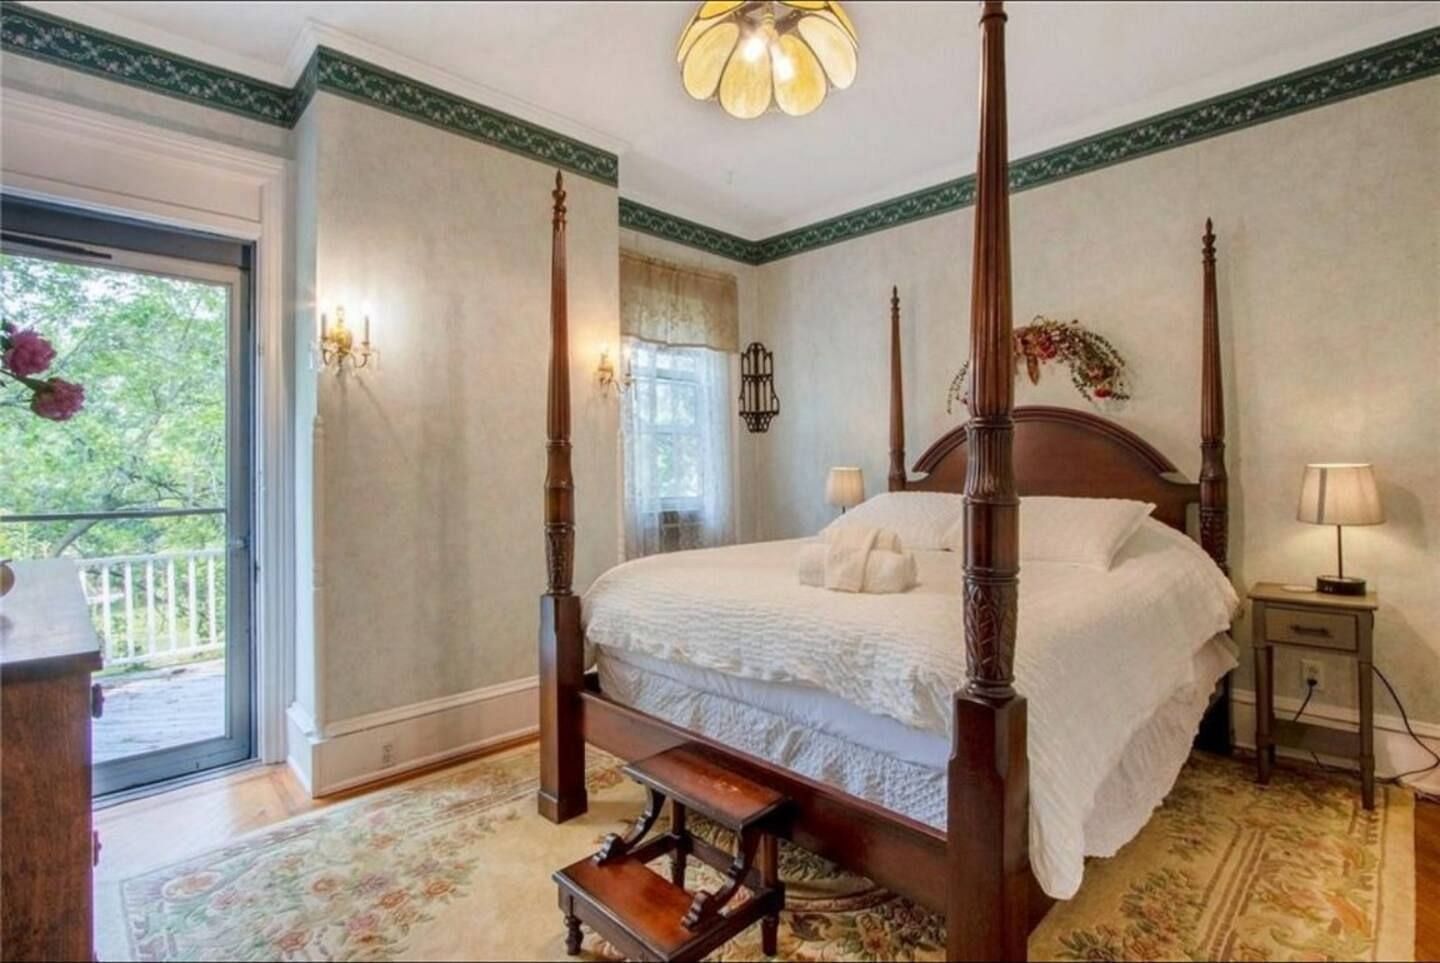 JWguest House at Chester, New York | Victorian Style Historic Home |  14 pax #1 | Jwbnb no brobnb 2